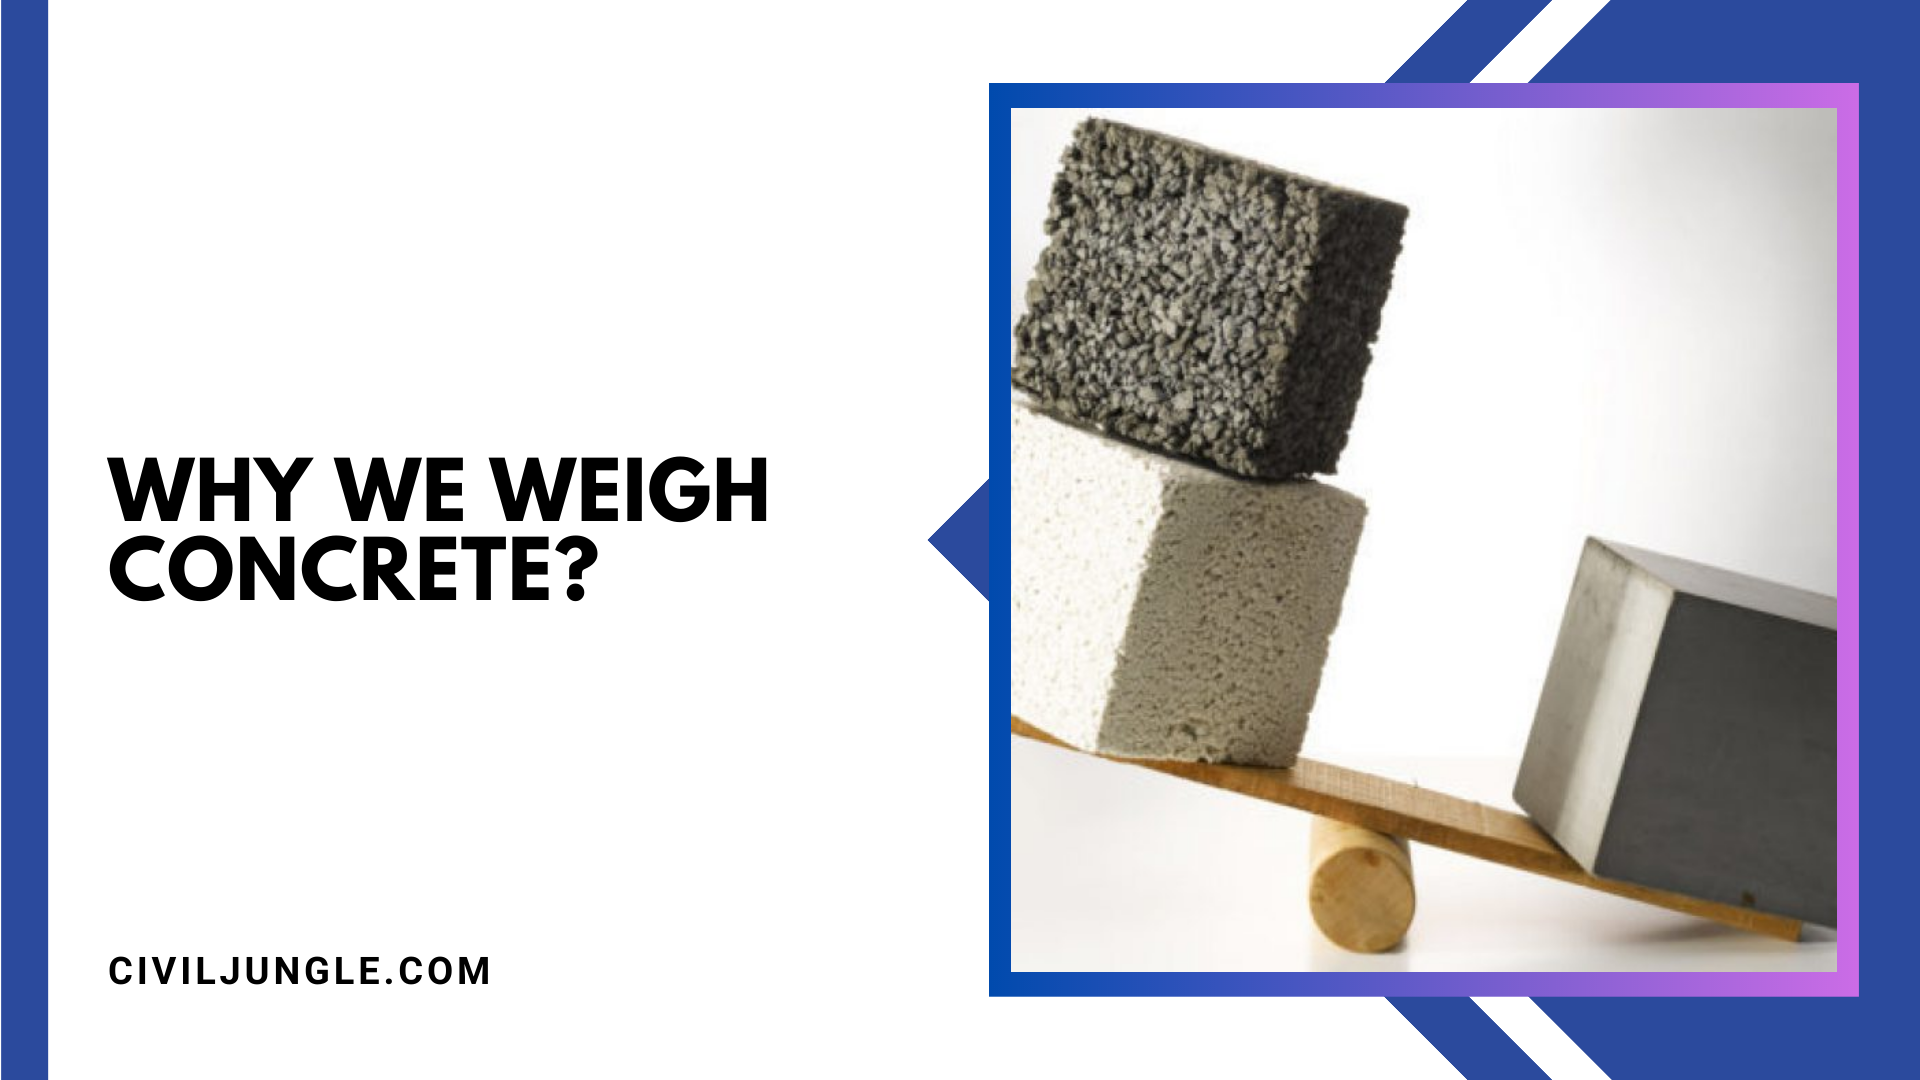 Why We Weigh Concrete?